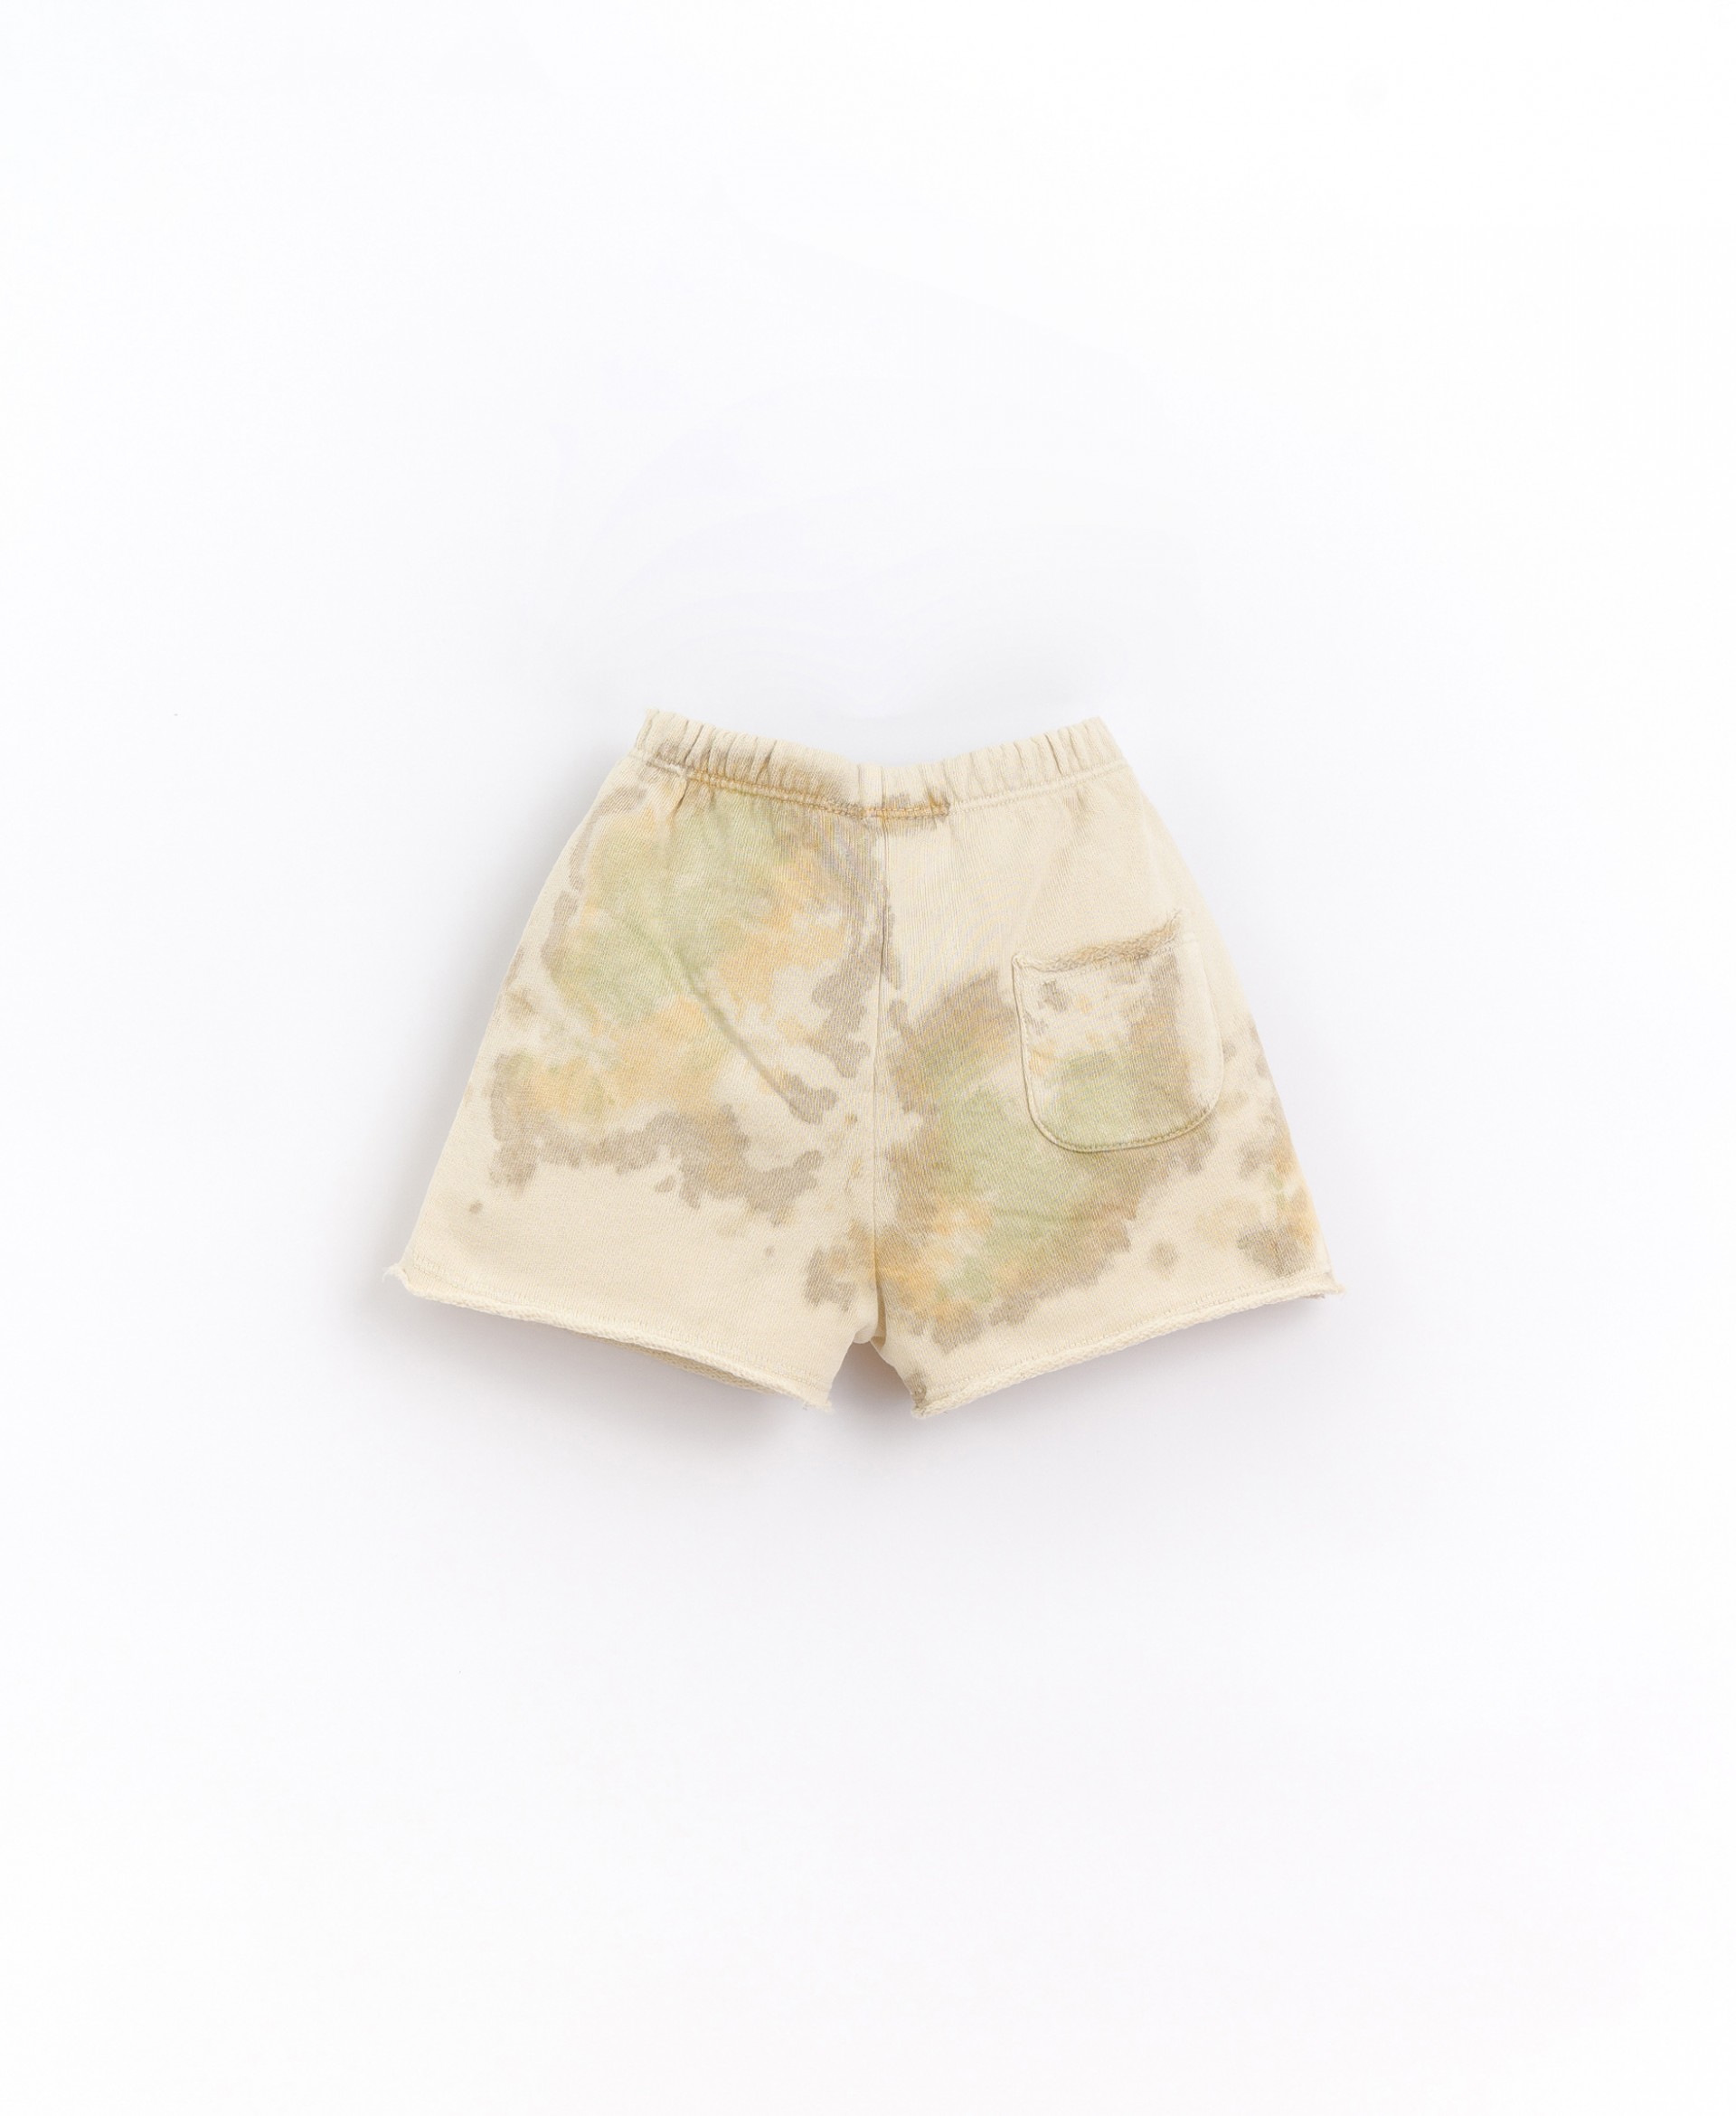 Naturally dyed shorts with pocket |Basketry